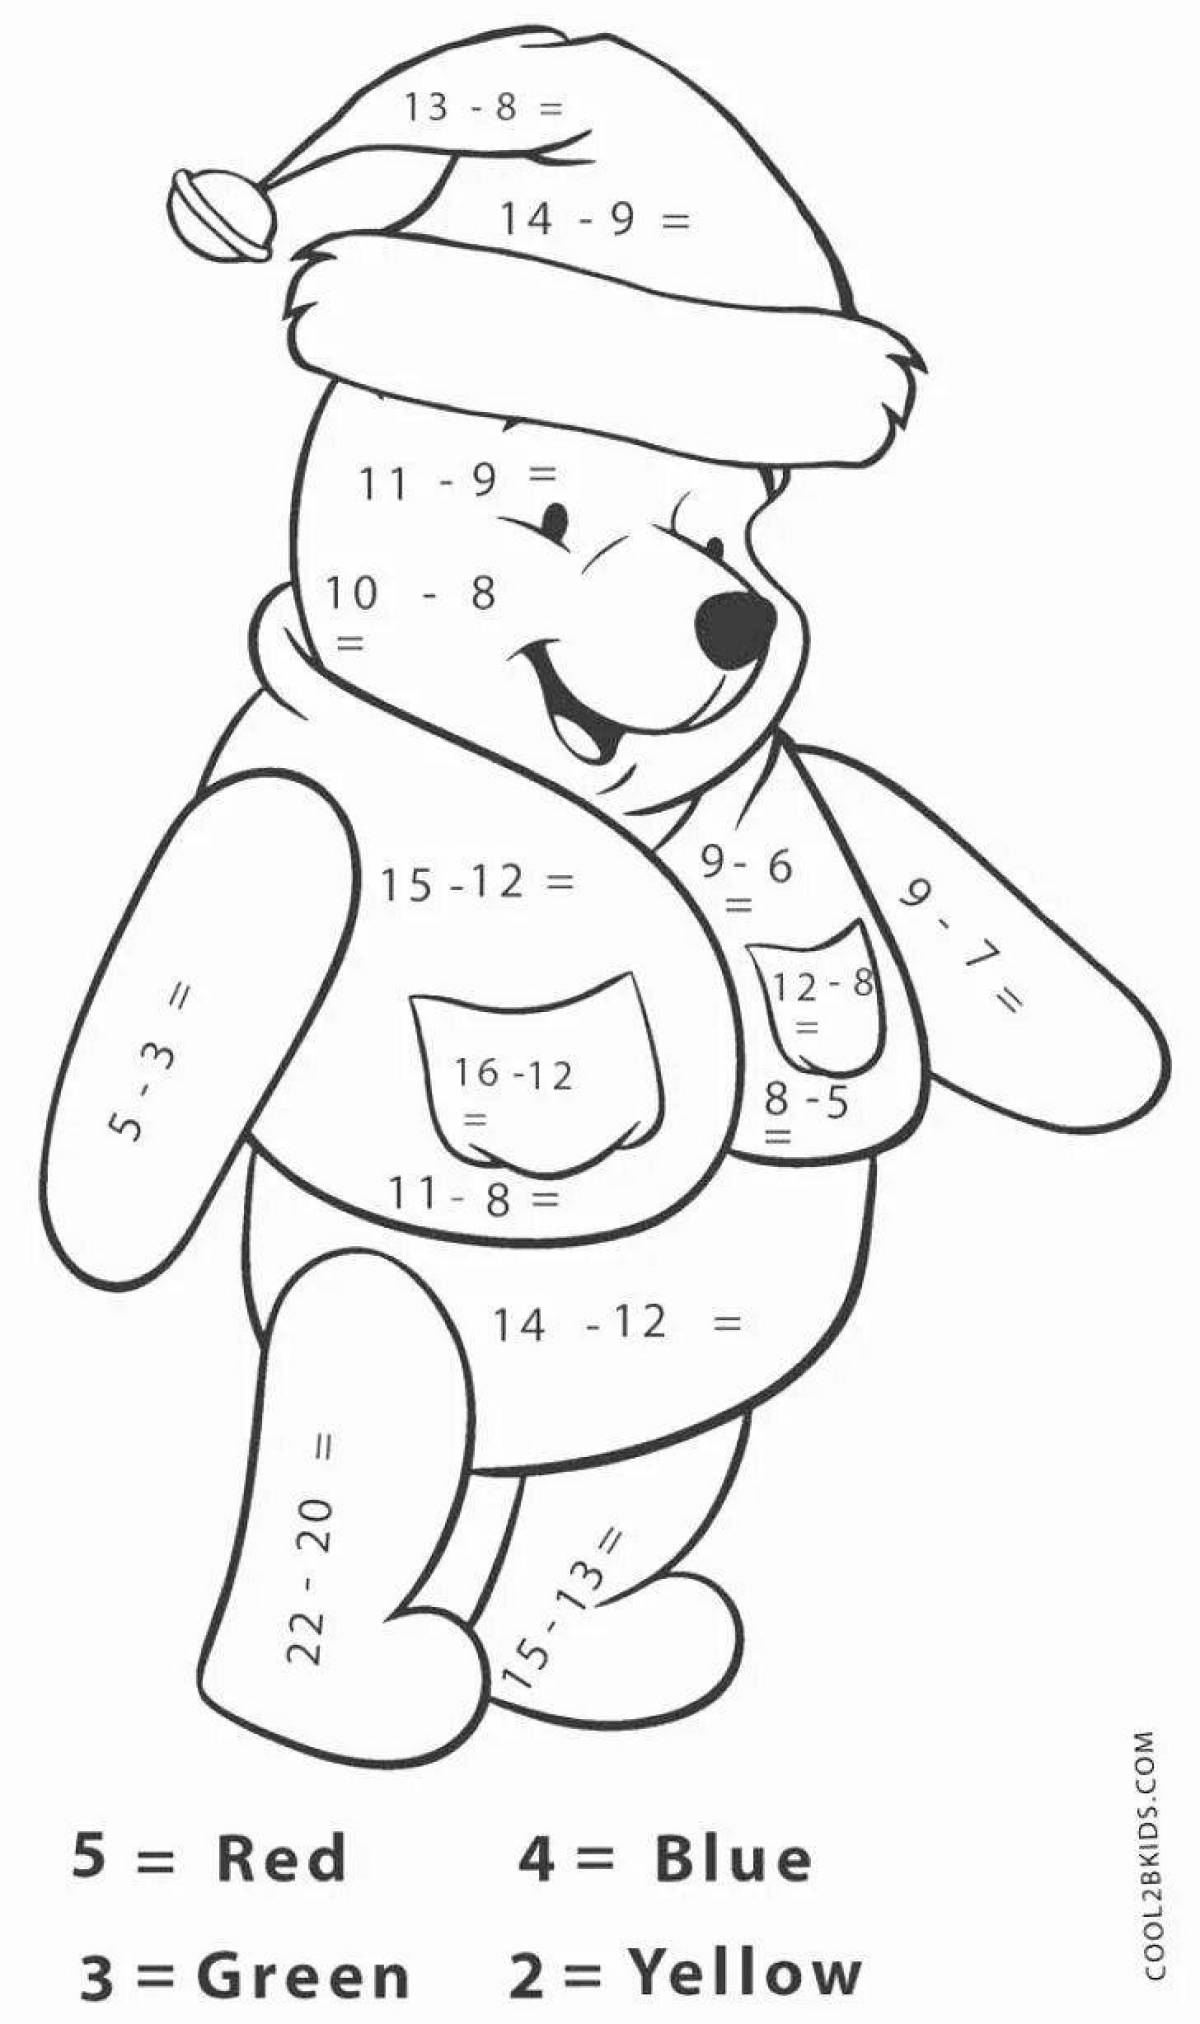 Charming coloring calculations